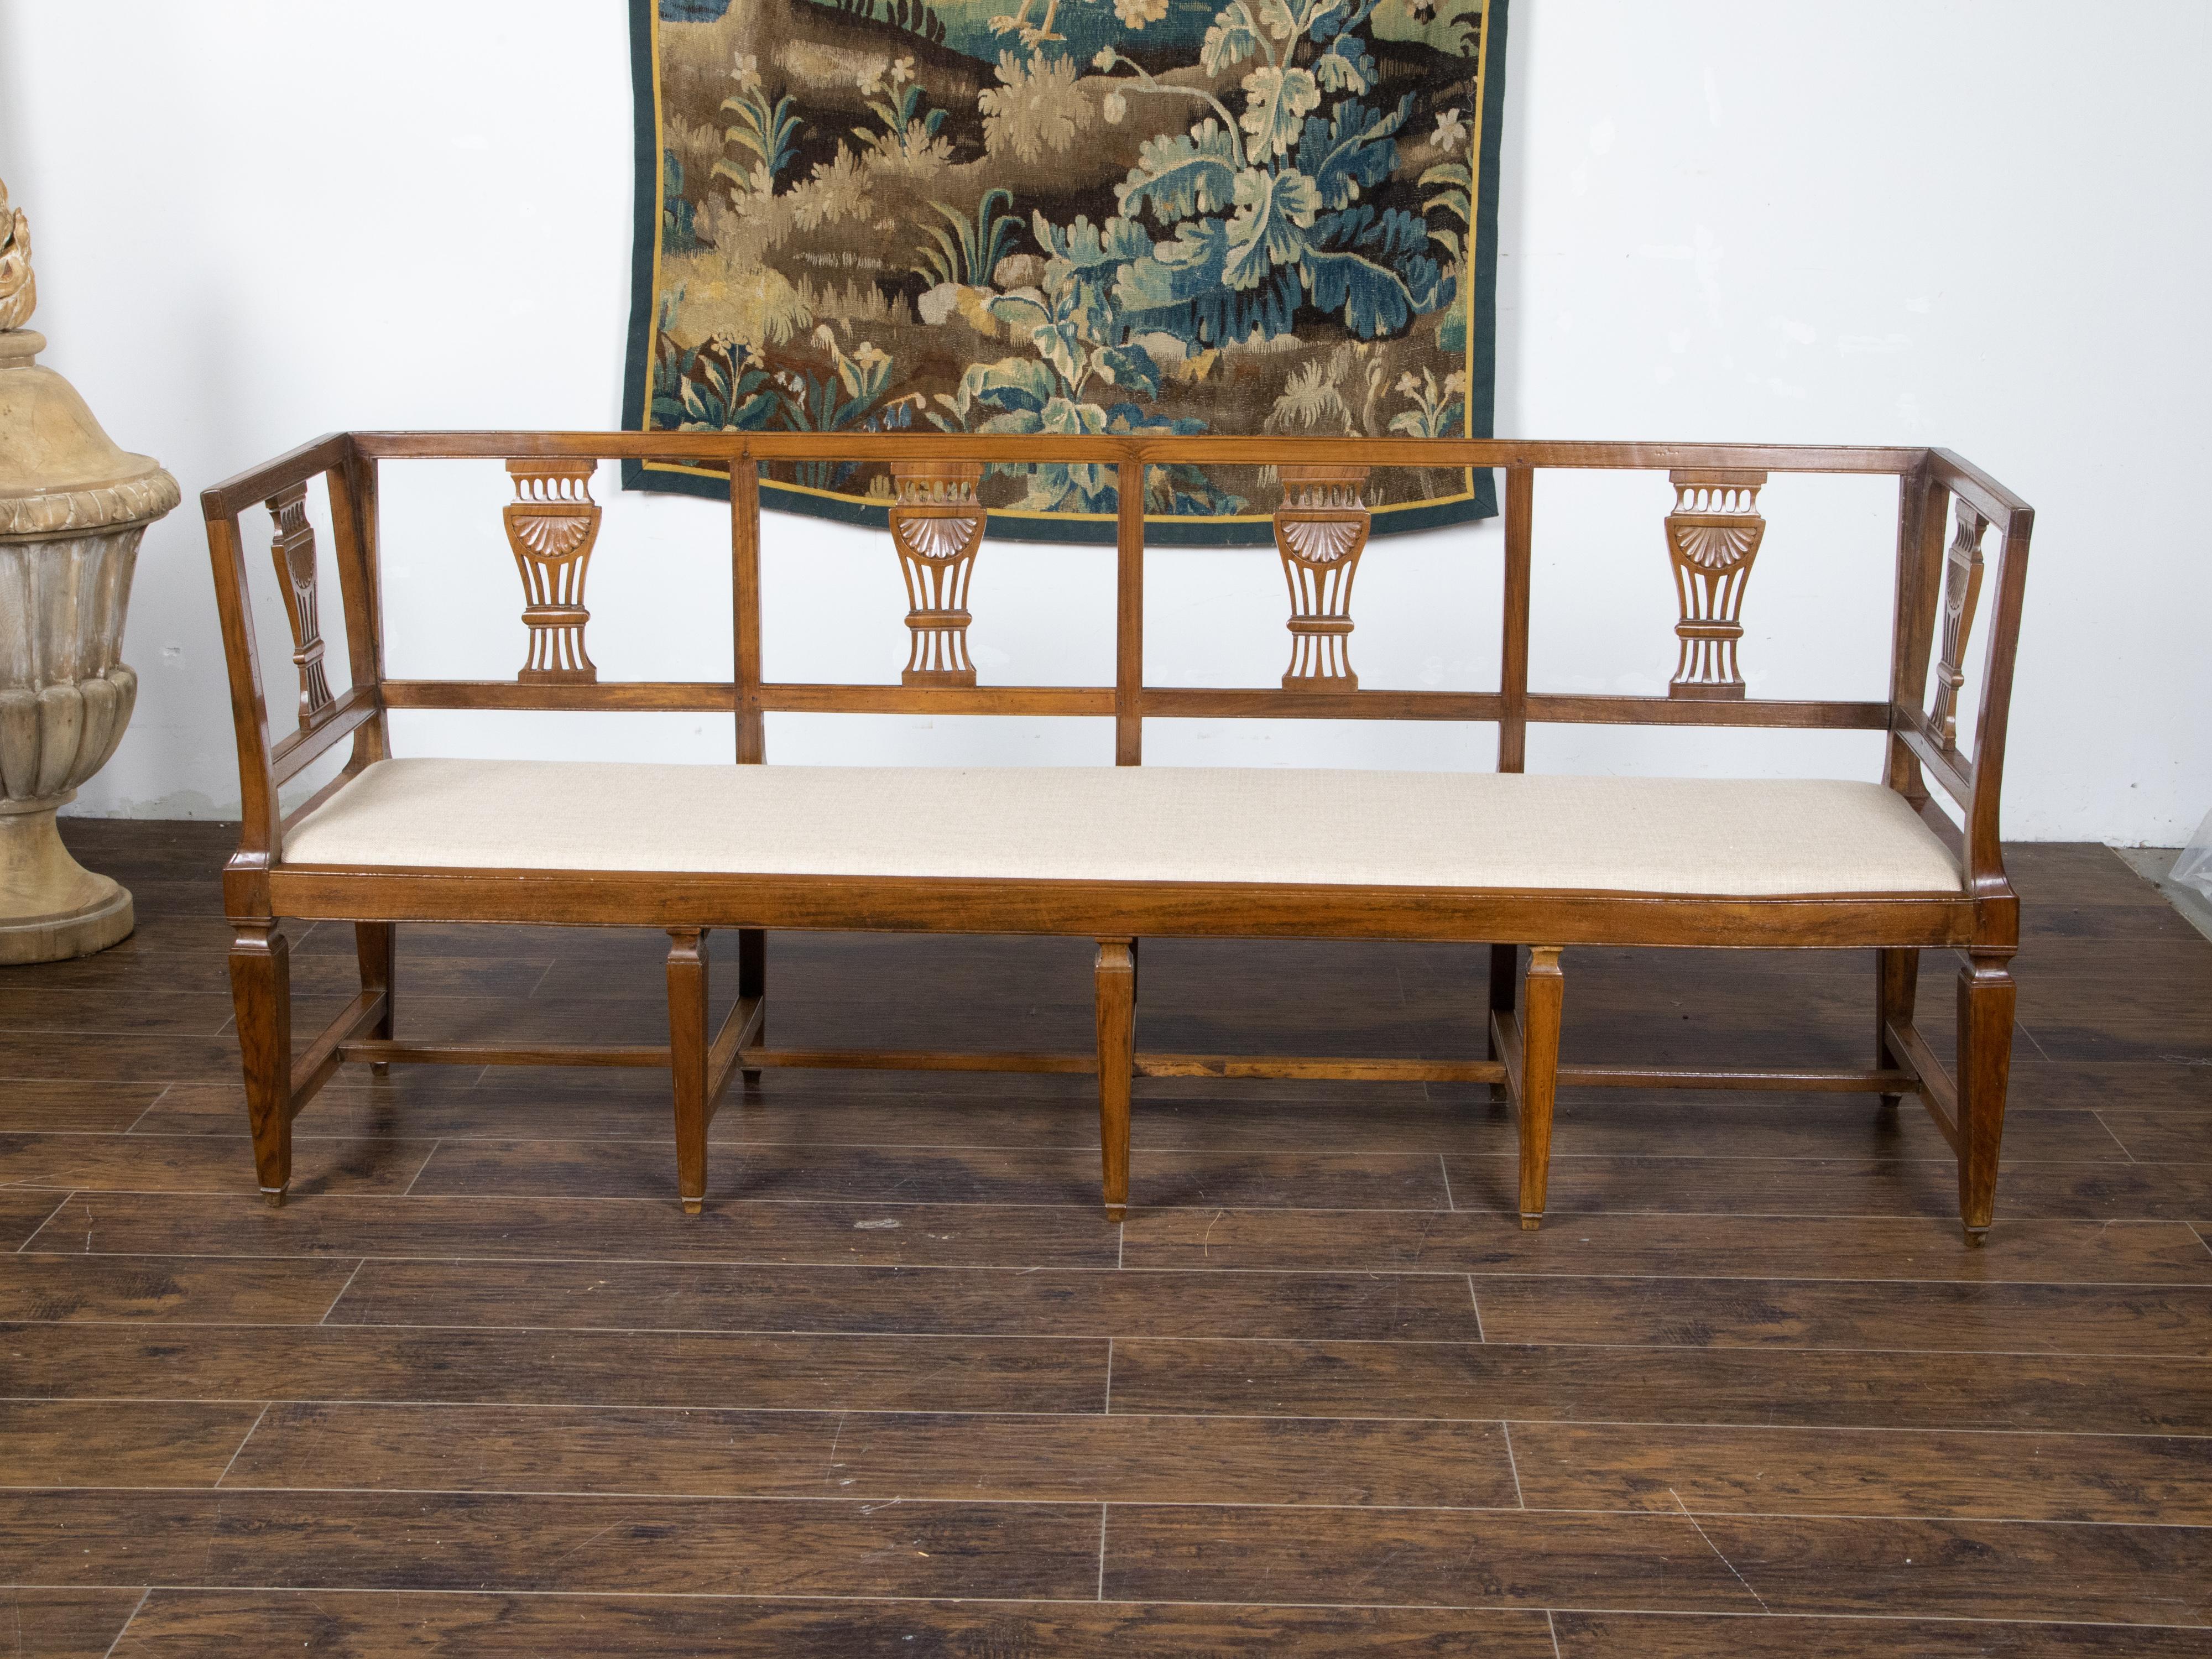 A continental Neoclassical style walnut four seater settee from the 19th century, with carved splats, upholstered seat, tapered legs and H-Form cross stretcher. Created in Continental Europe during the 19th century, this Neoclassical style walnut